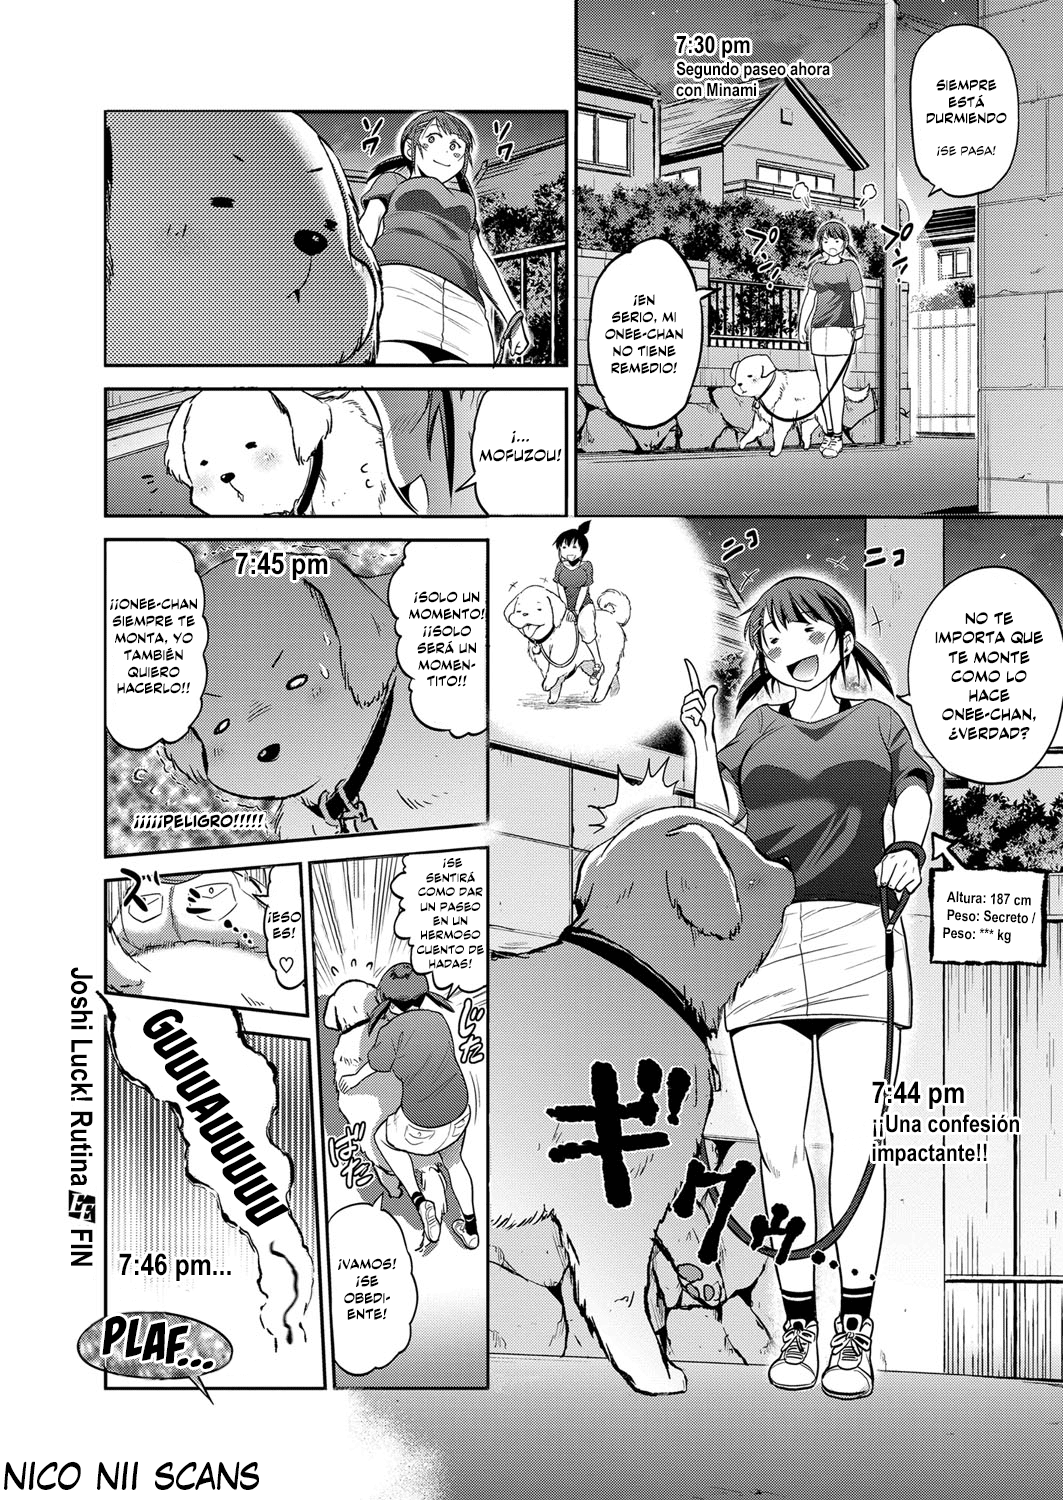 [DISTANCE] Joshi Luck! ~2 Years Later~ Nichijou Hen Ch. 1 (COMIC ExE 11) [Spanish] [NicoNiiScans] [Digital] [DISTANCE] じょしラク! ～2 Years Later～ 日常編 第1話 (コミック エグゼ 11) [スペイン翻訳] [DL版]